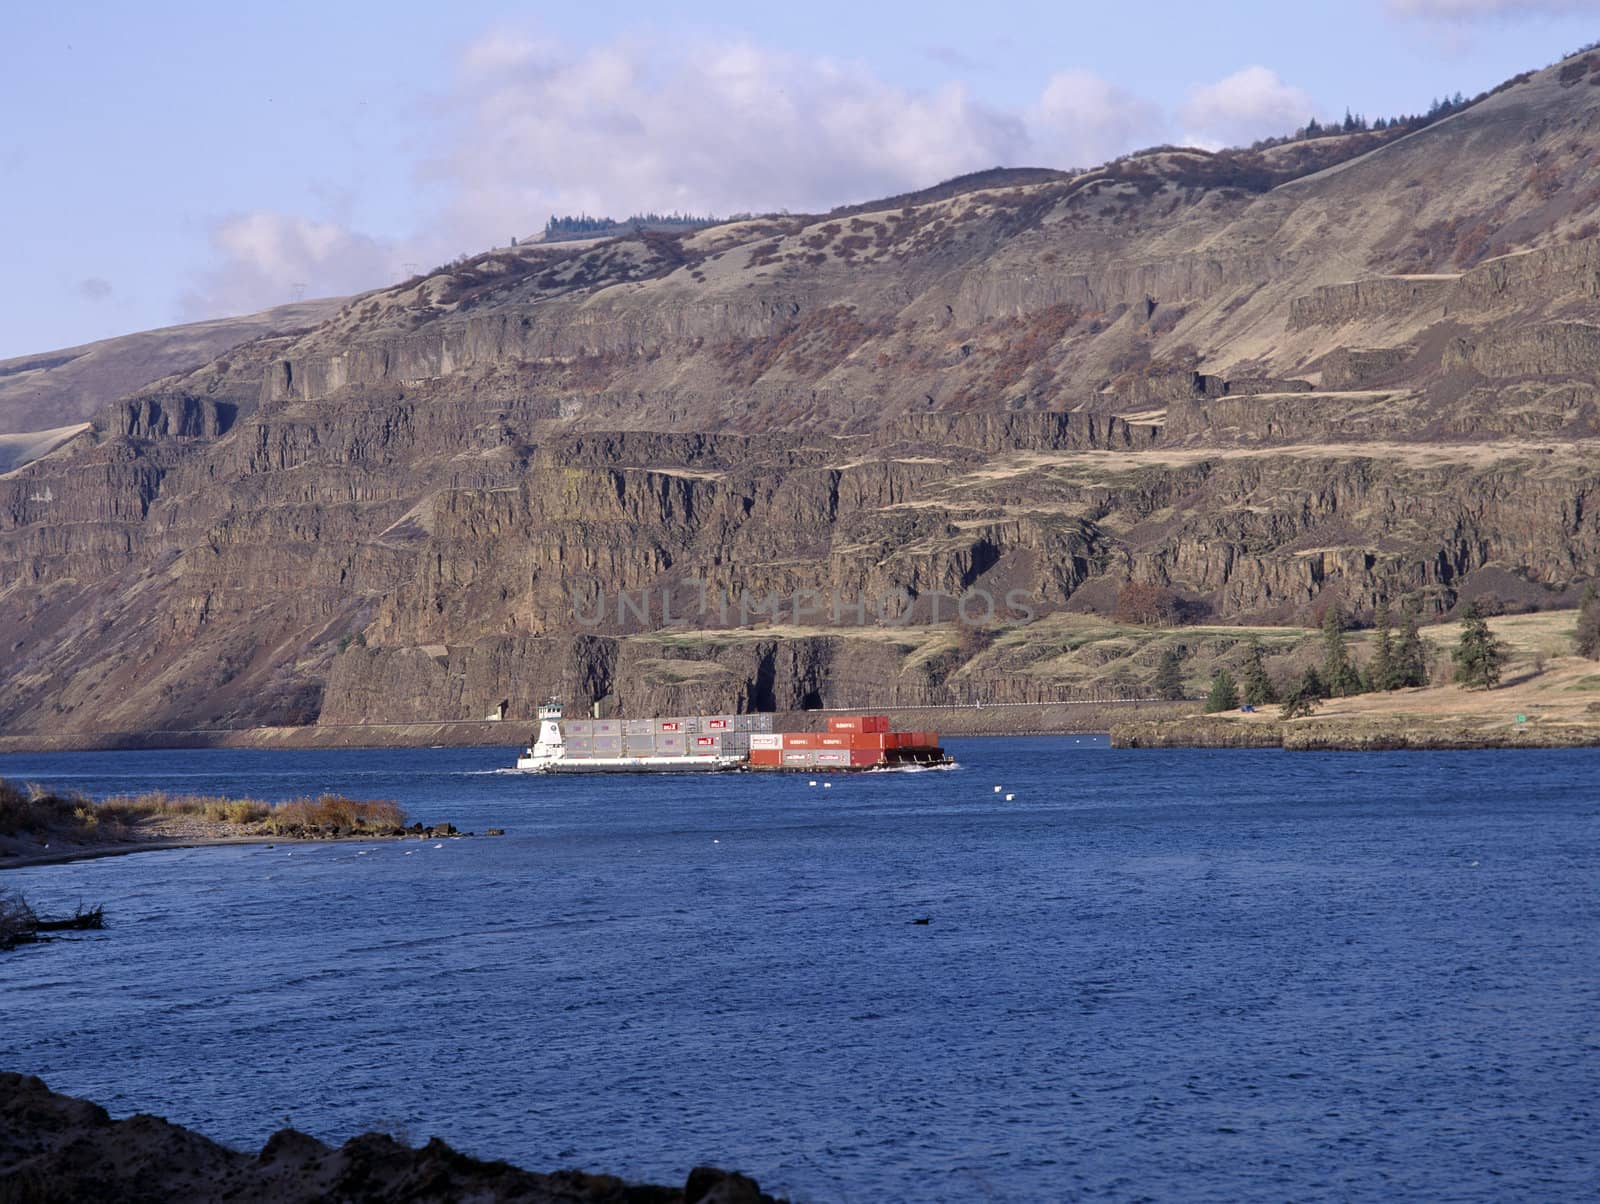 Red barge on the Columbia River, Oregon by RUSSELLIMAGES